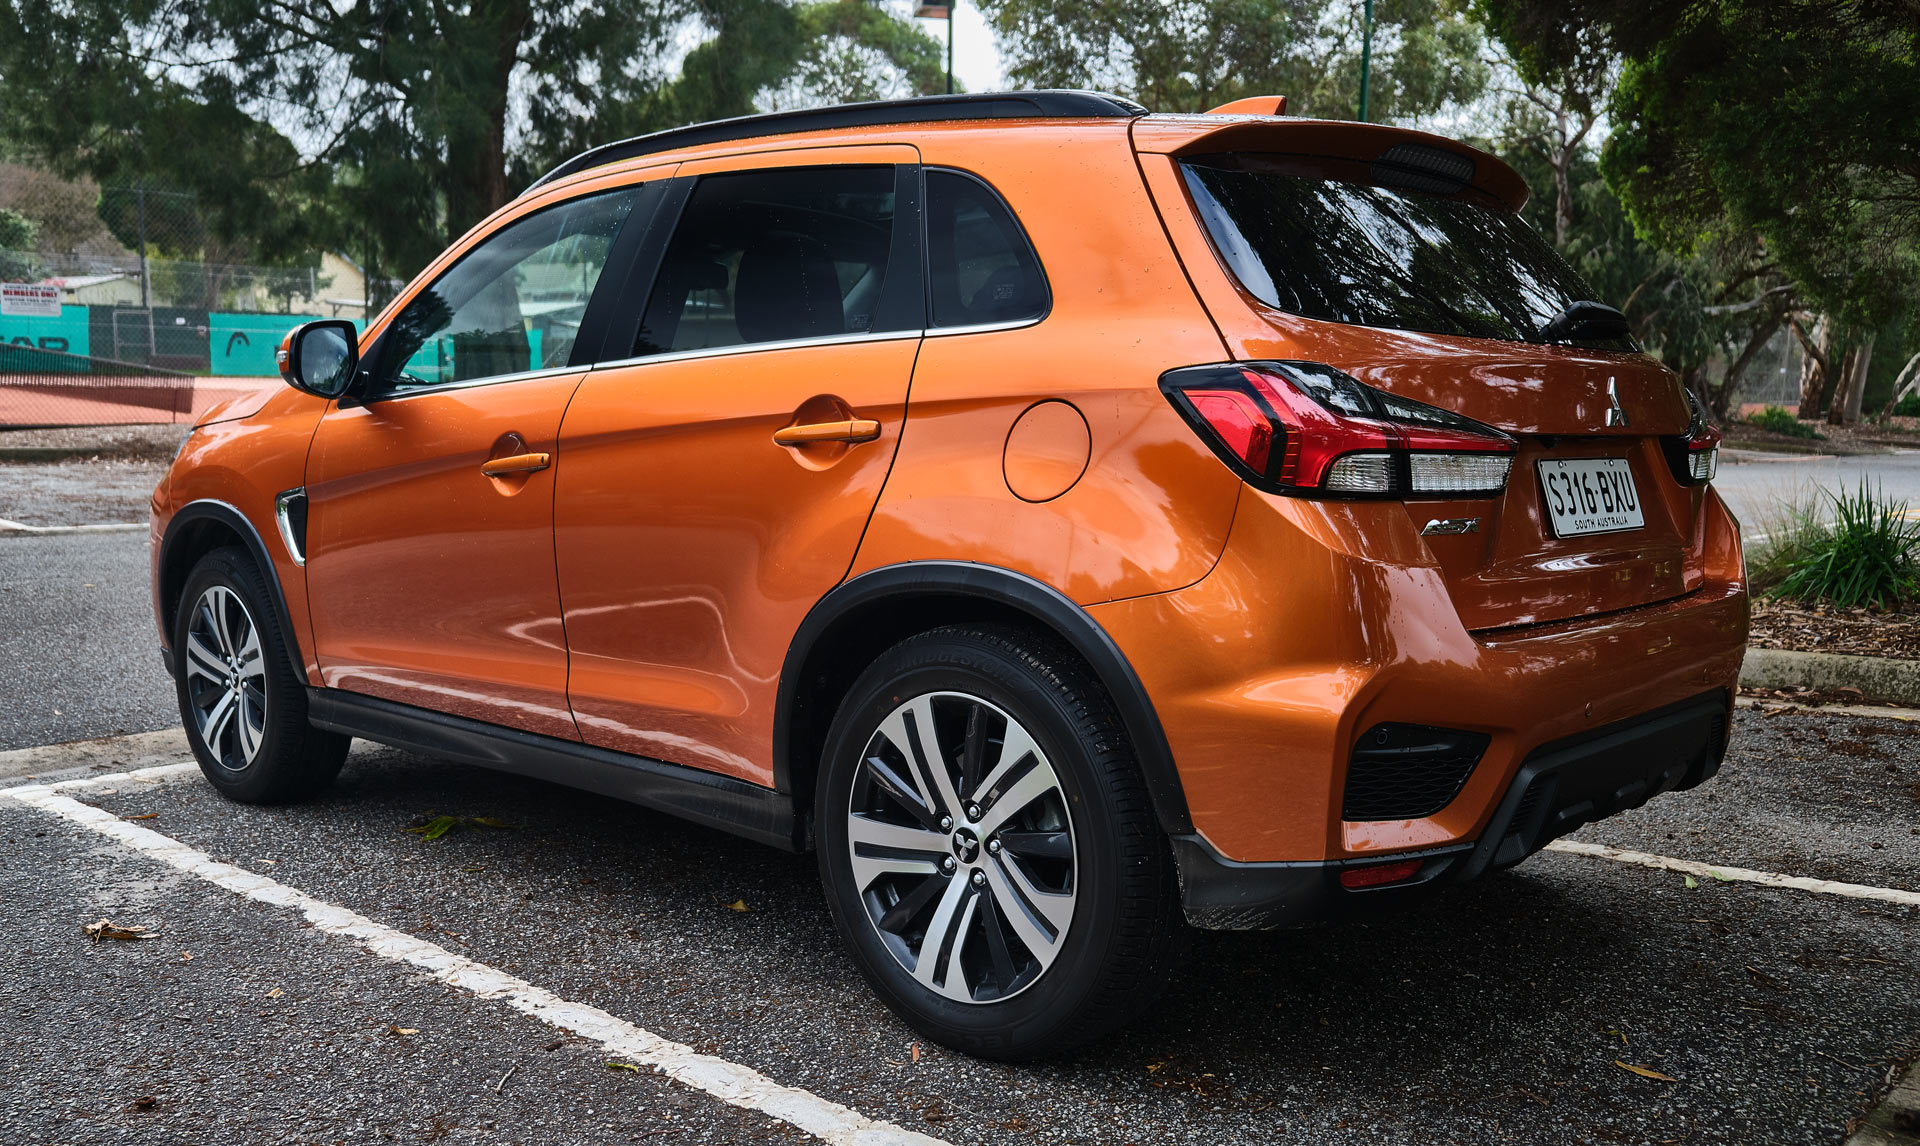 Driven: 2020 Mitsubishi ASX Looks Fresh But Desperately Needs A Replacement